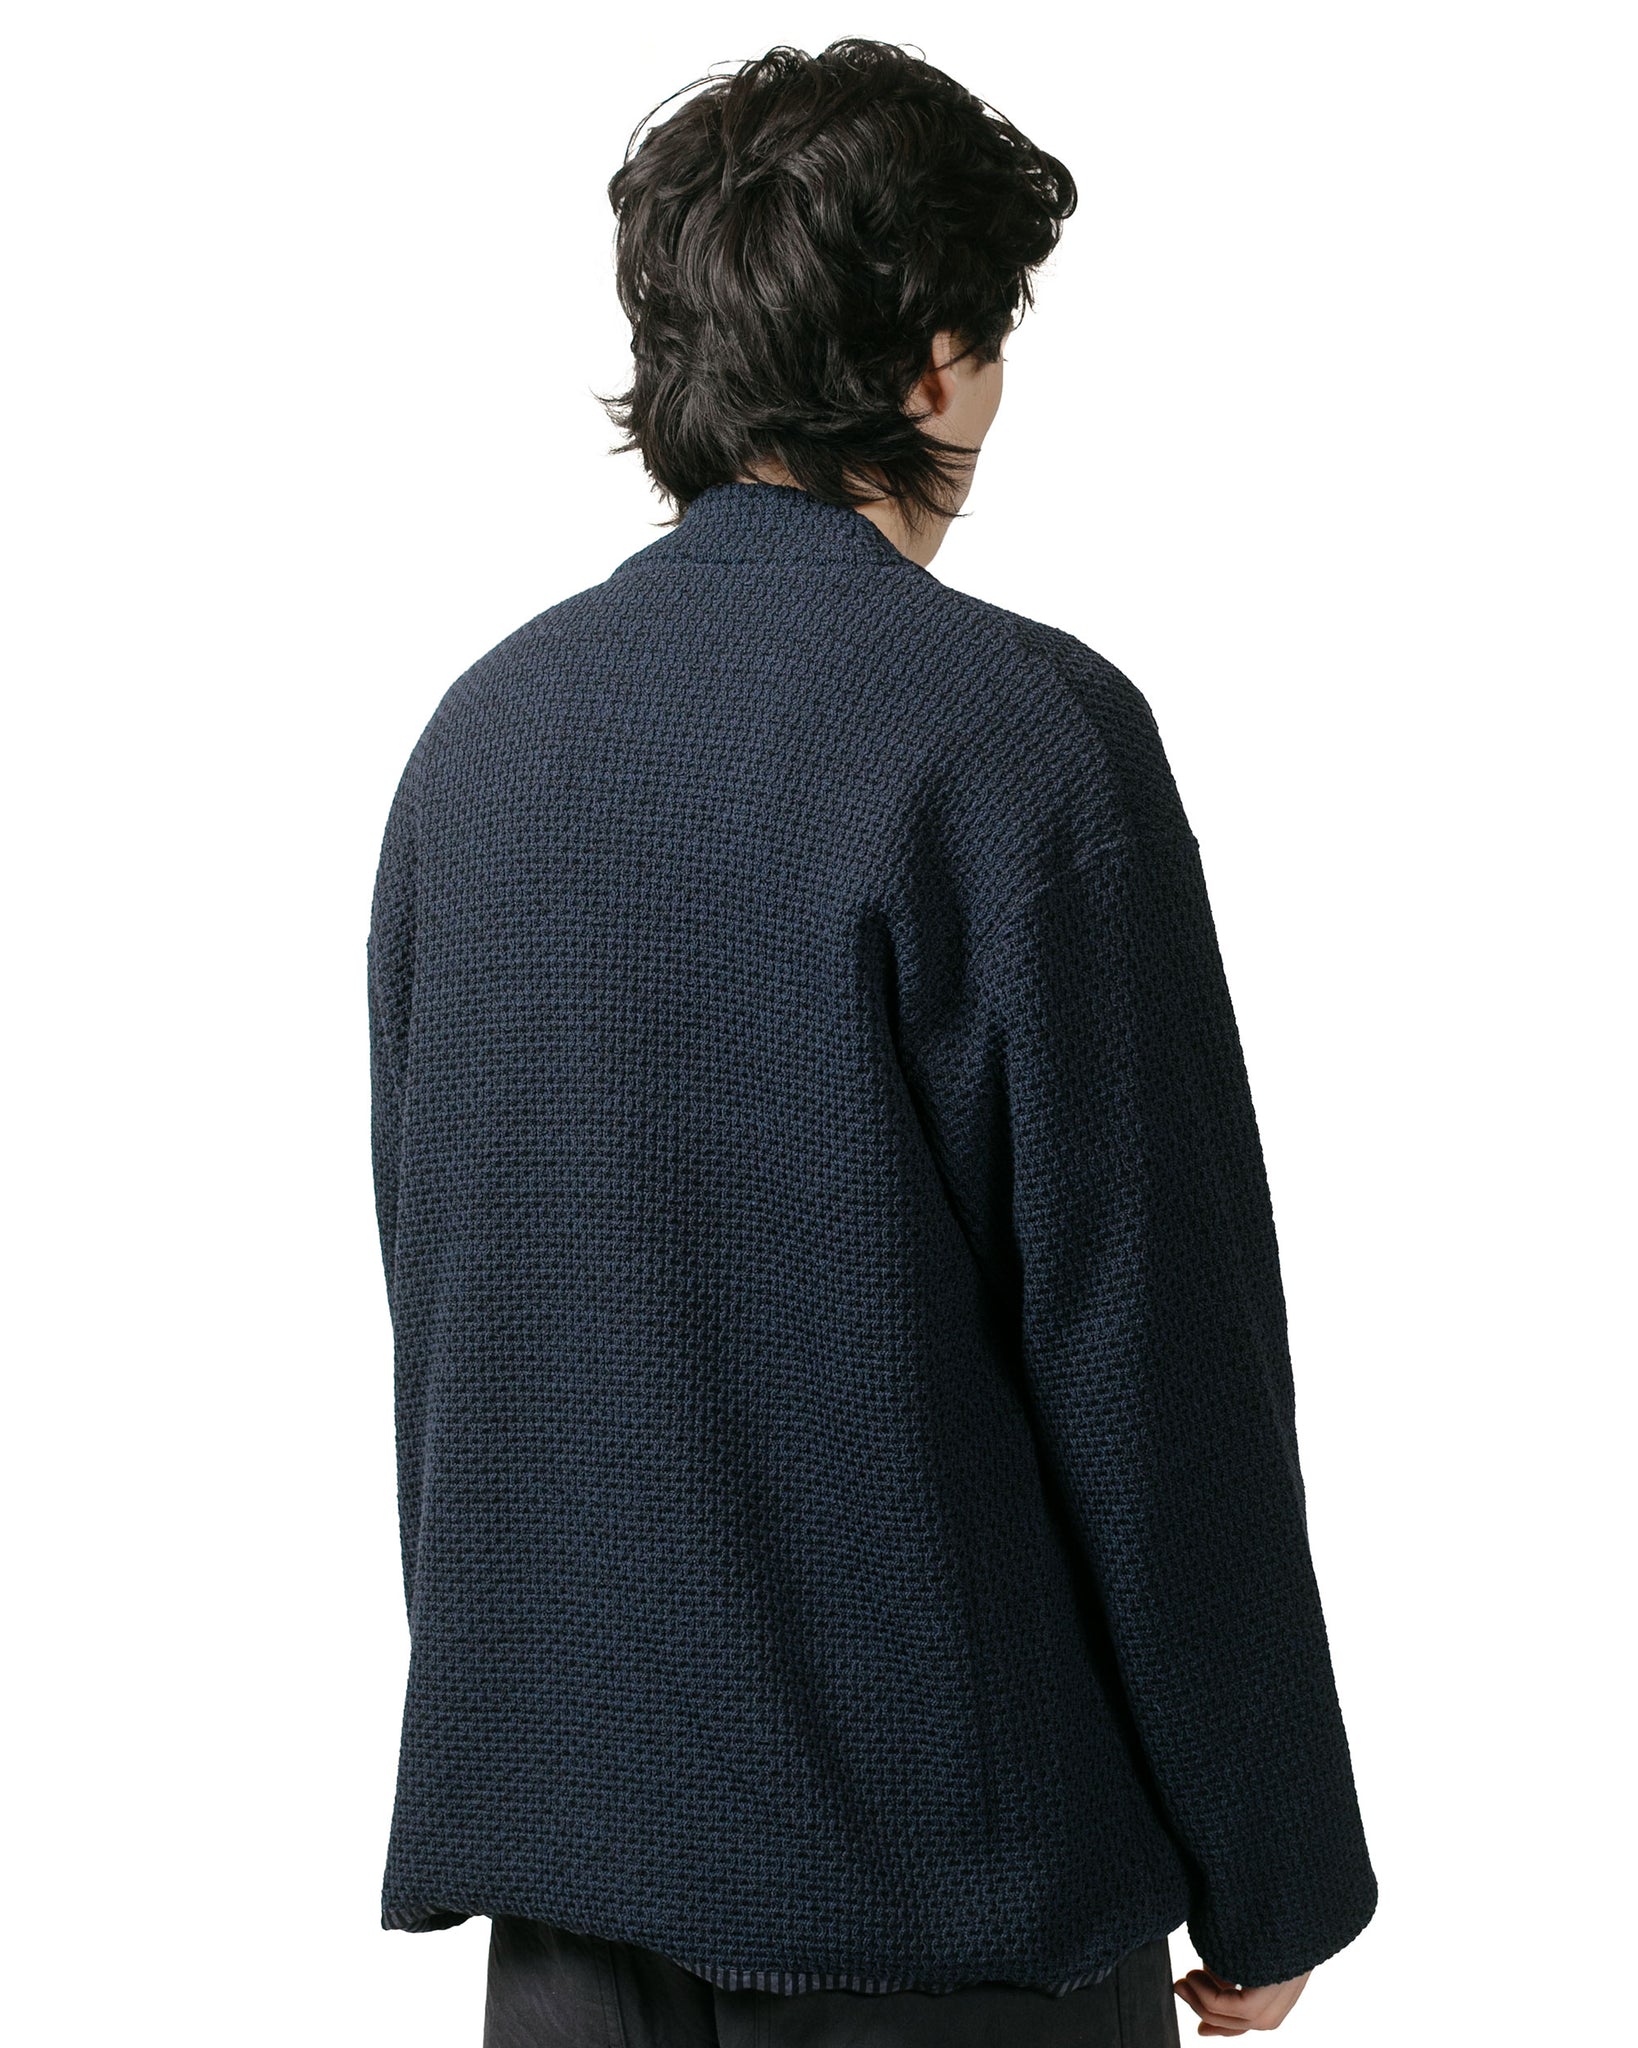 ts(s) Lined Easy Cardigan Cotton/Polyester Knitty Jersey Navy model back